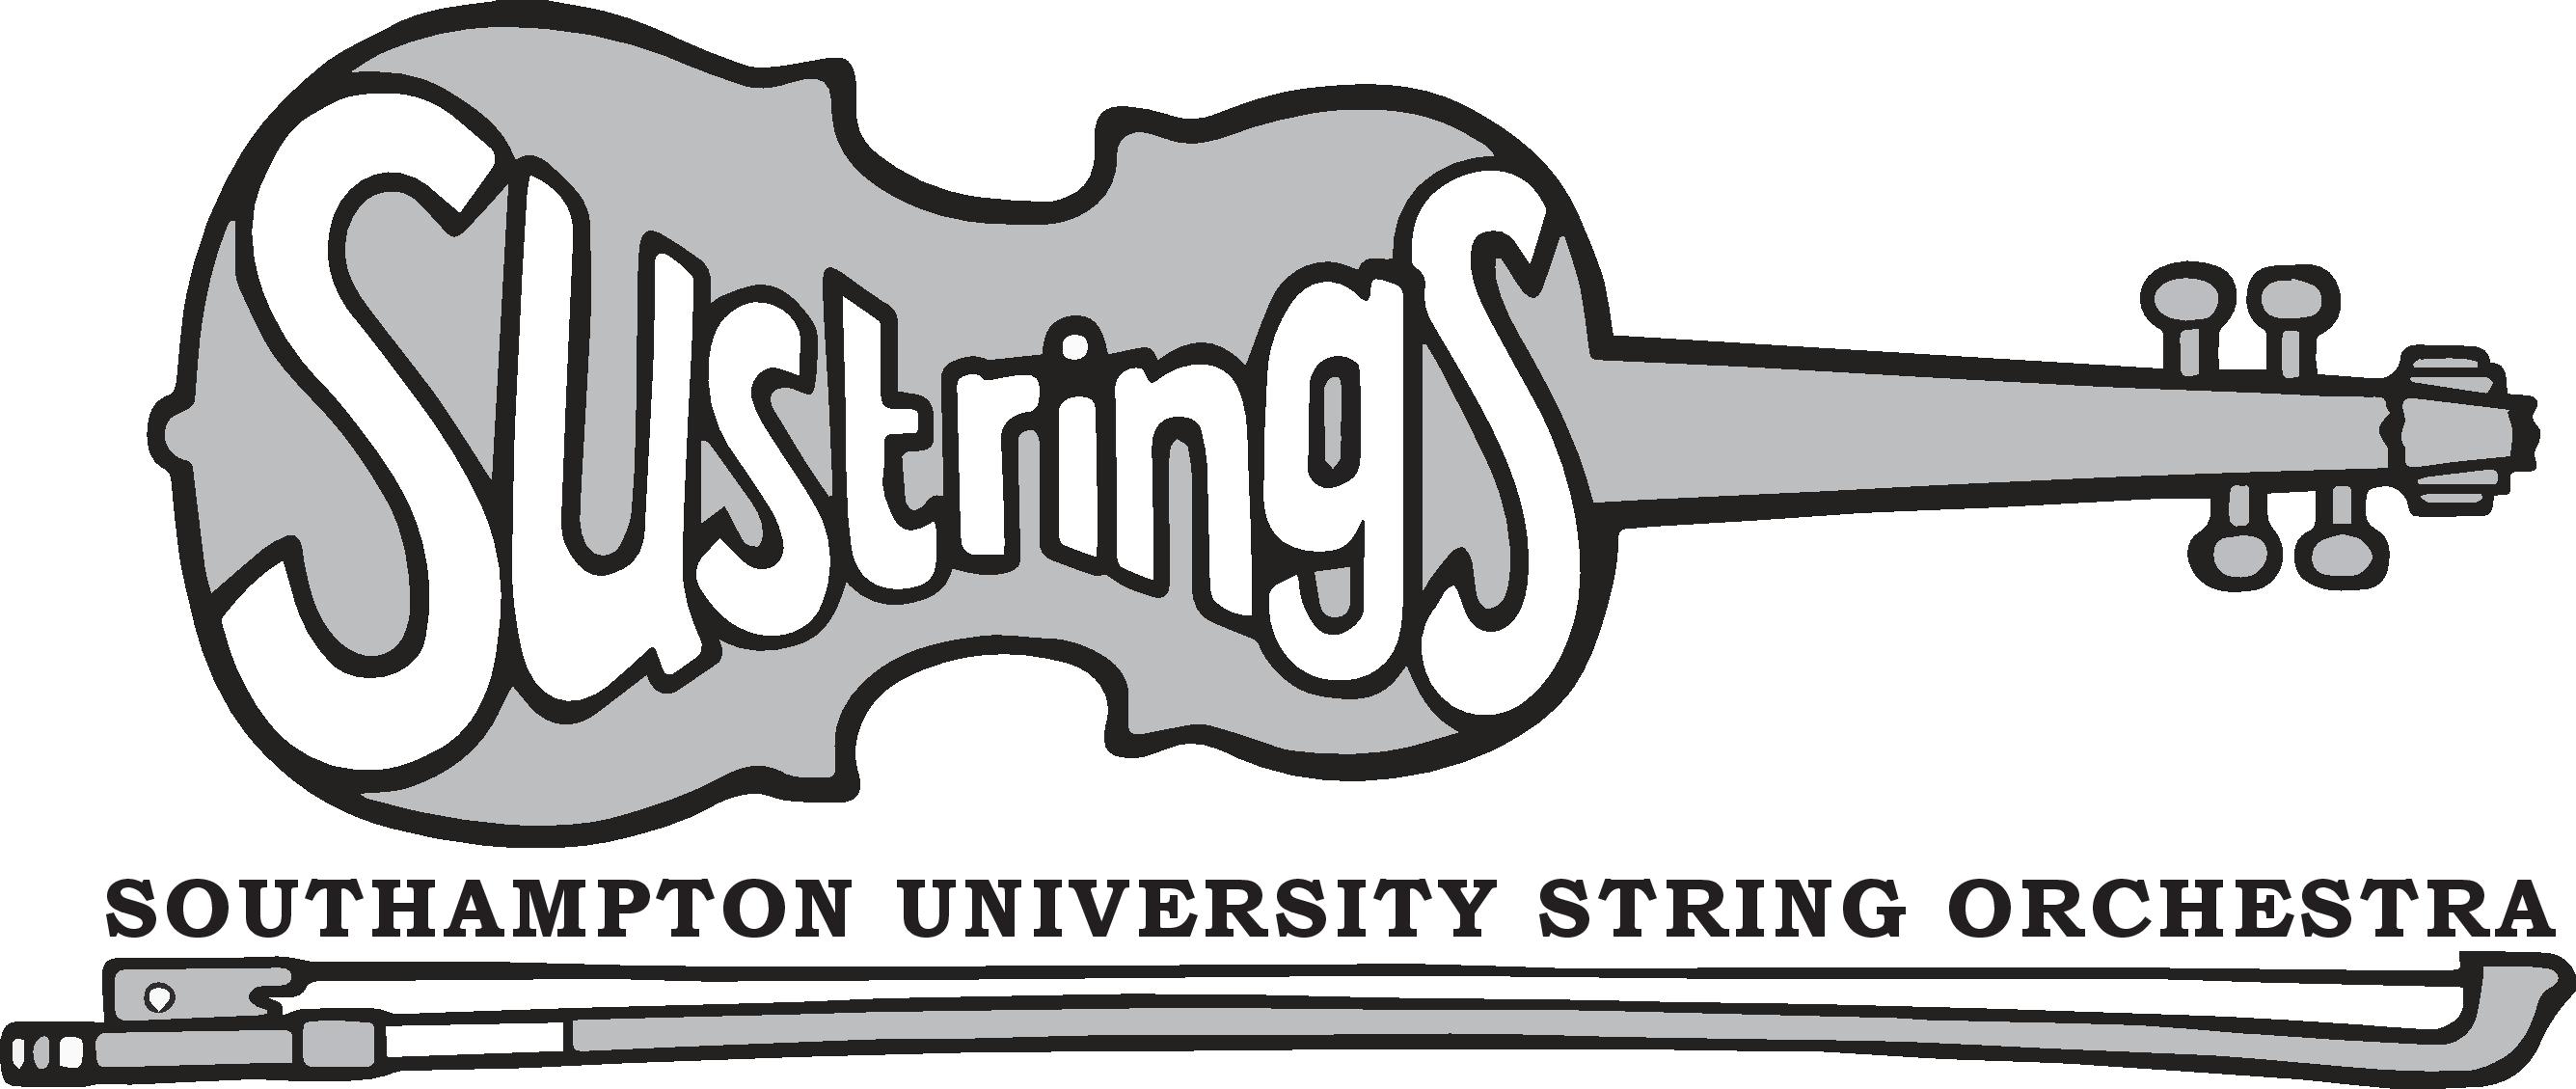 SUStrings (String Orchestra)